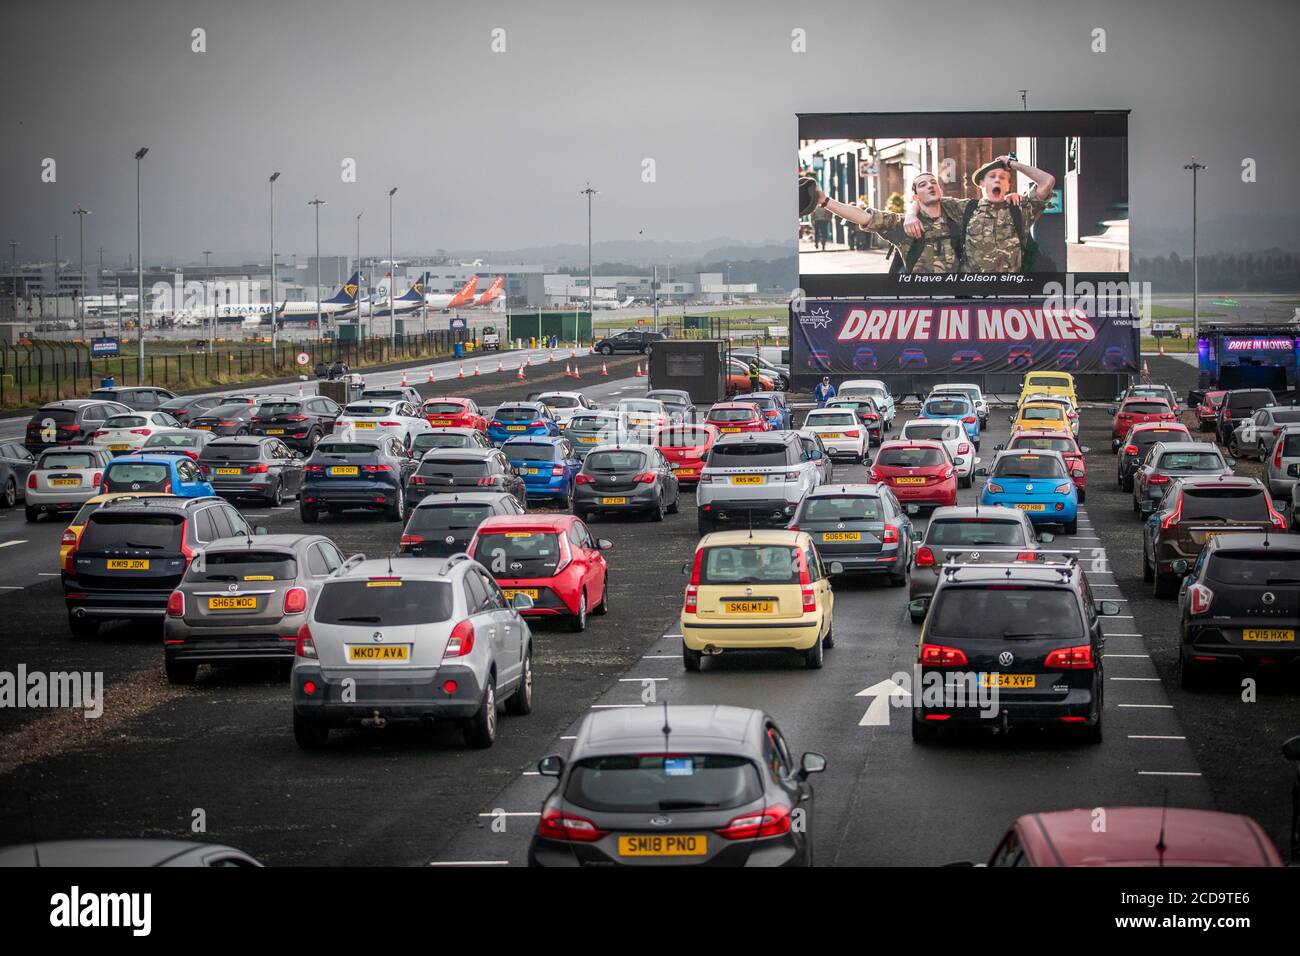 Movie-goers watch the film Sunshine On Leith in their cars at the socially distanced Drive-in Movie arena which has been set up at Edinburgh Airport as part of the Edinburgh International Film Festival. Stock Photo